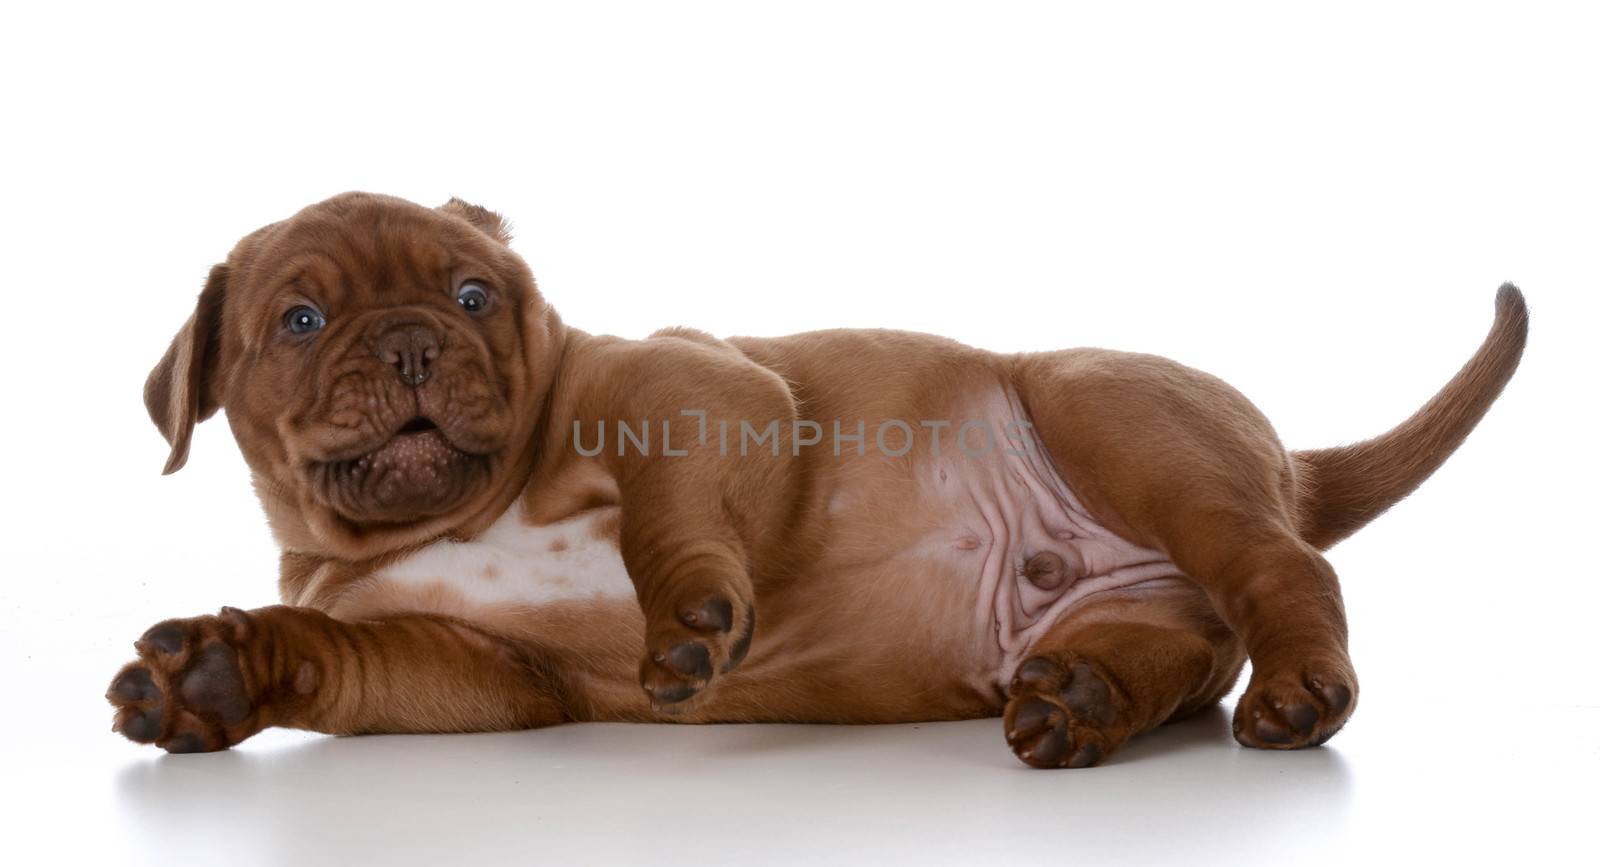 cute puppy - dogue de bordeaux puppy with cute expression on white background